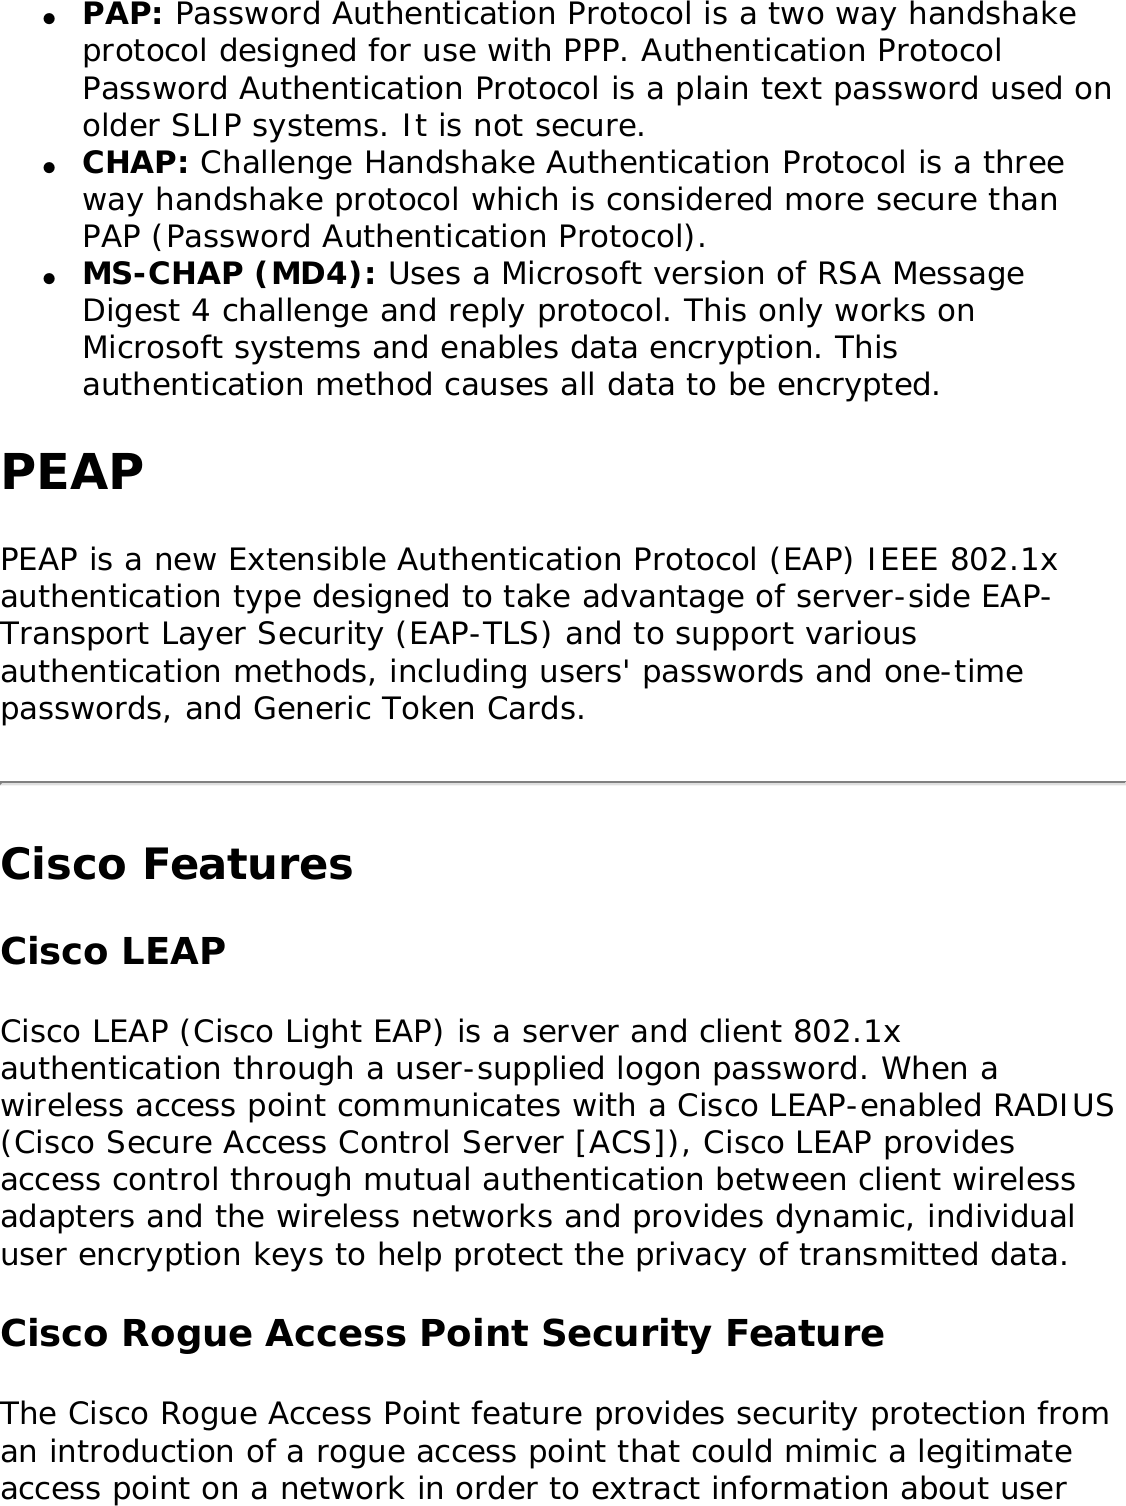 ●     PAP: Password Authentication Protocol is a two way handshake protocol designed for use with PPP. Authentication Protocol Password Authentication Protocol is a plain text password used on older SLIP systems. It is not secure. ●     CHAP: Challenge Handshake Authentication Protocol is a three way handshake protocol which is considered more secure than PAP (Password Authentication Protocol). ●     MS-CHAP (MD4): Uses a Microsoft version of RSA Message Digest 4 challenge and reply protocol. This only works on Microsoft systems and enables data encryption. This authentication method causes all data to be encrypted.PEAPPEAP is a new Extensible Authentication Protocol (EAP) IEEE 802.1x authentication type designed to take advantage of server-side EAP-Transport Layer Security (EAP-TLS) and to support various authentication methods, including users&apos; passwords and one-time passwords, and Generic Token Cards. Cisco FeaturesCisco LEAP Cisco LEAP (Cisco Light EAP) is a server and client 802.1x authentication through a user-supplied logon password. When a wireless access point communicates with a Cisco LEAP-enabled RADIUS (Cisco Secure Access Control Server [ACS]), Cisco LEAP provides access control through mutual authentication between client wireless adapters and the wireless networks and provides dynamic, individual user encryption keys to help protect the privacy of transmitted data. Cisco Rogue Access Point Security FeatureThe Cisco Rogue Access Point feature provides security protection from an introduction of a rogue access point that could mimic a legitimate access point on a network in order to extract information about user 